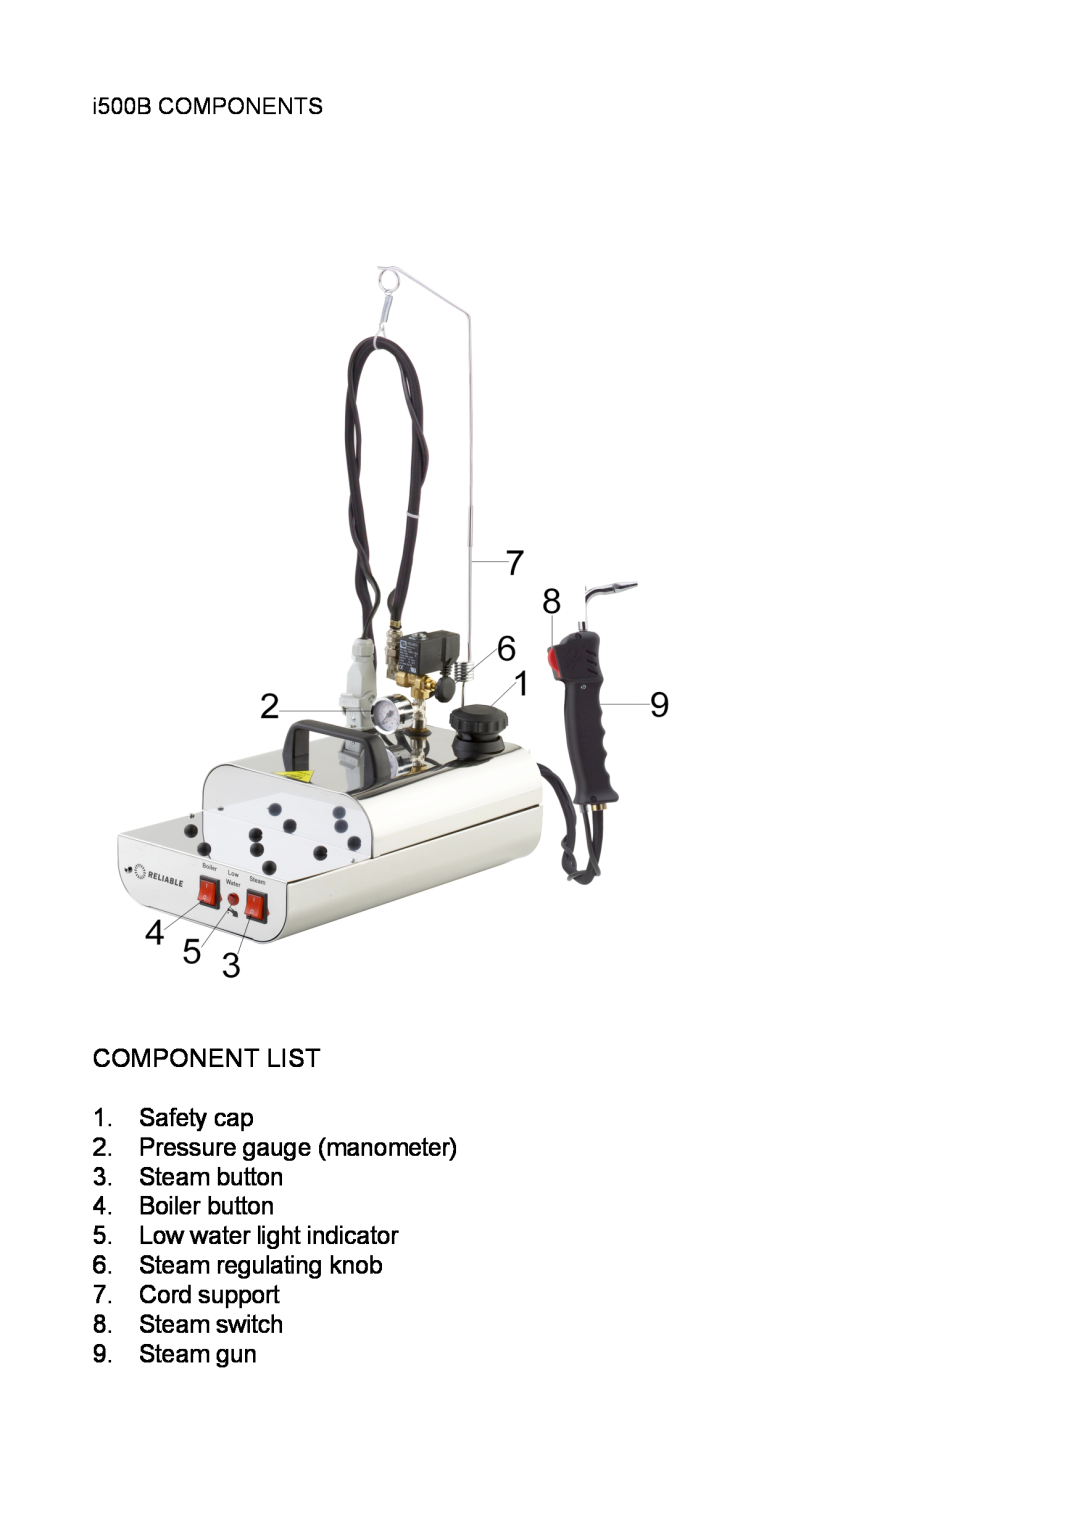 Reliable I500A instruction manual COMPONENT LIST 1. Safety cap 2. Pressure gauge manometer, i500B COMPONENTS 